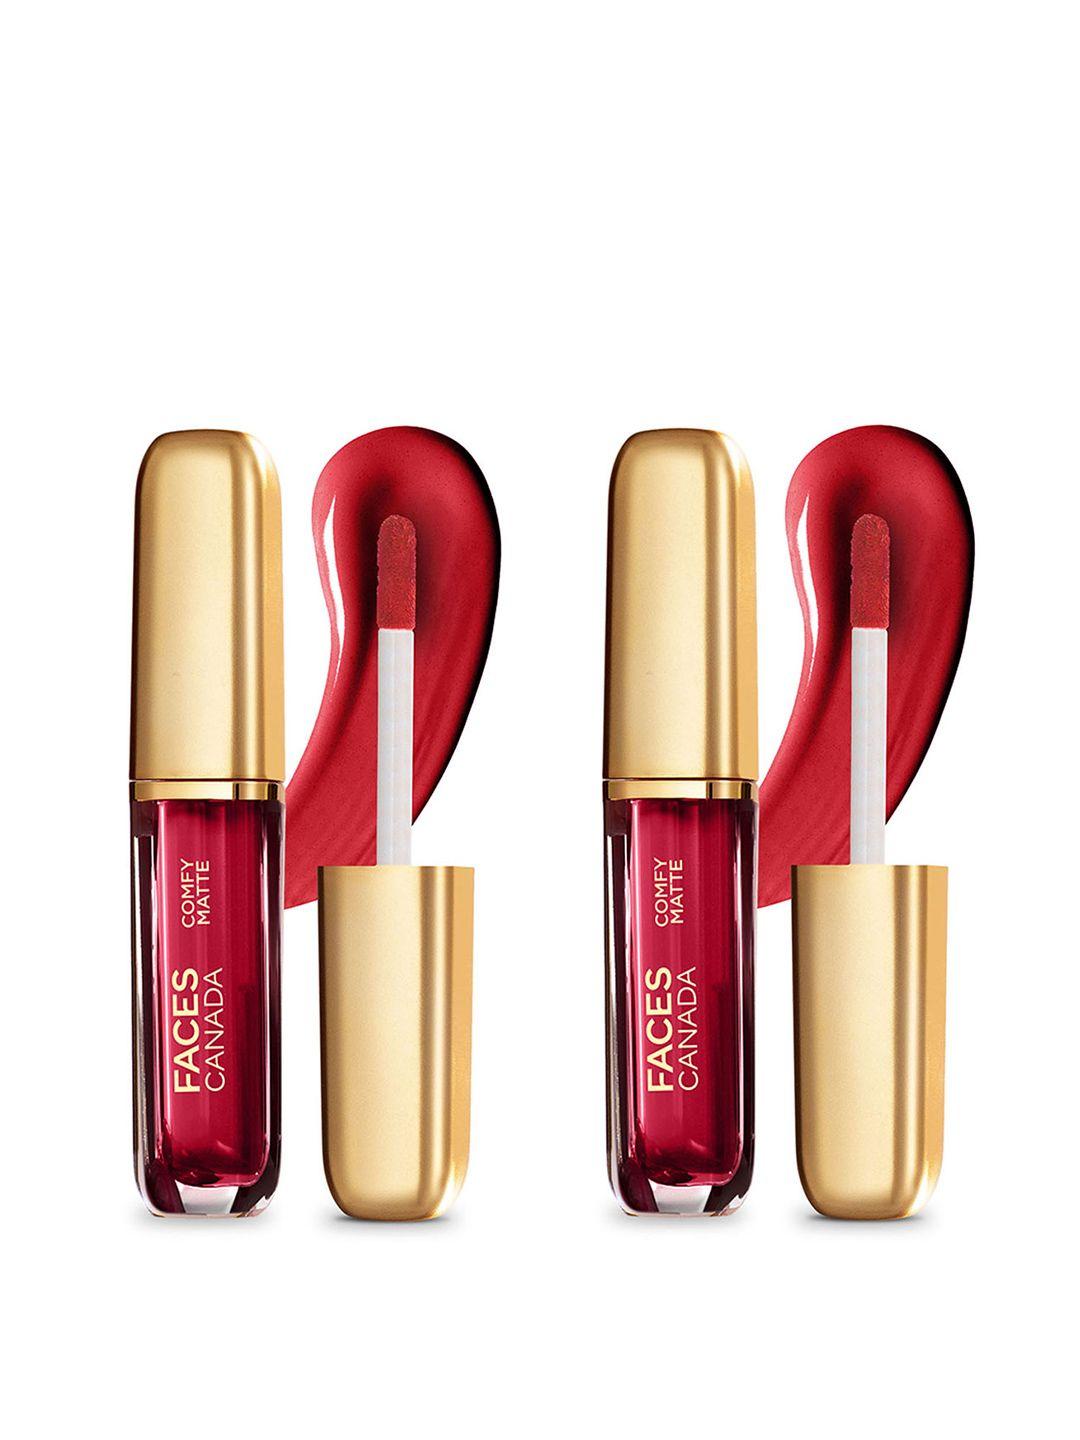 faces canada set of 2 comfy matte no-dryness liquid lipstick 3ml each - on my way 01